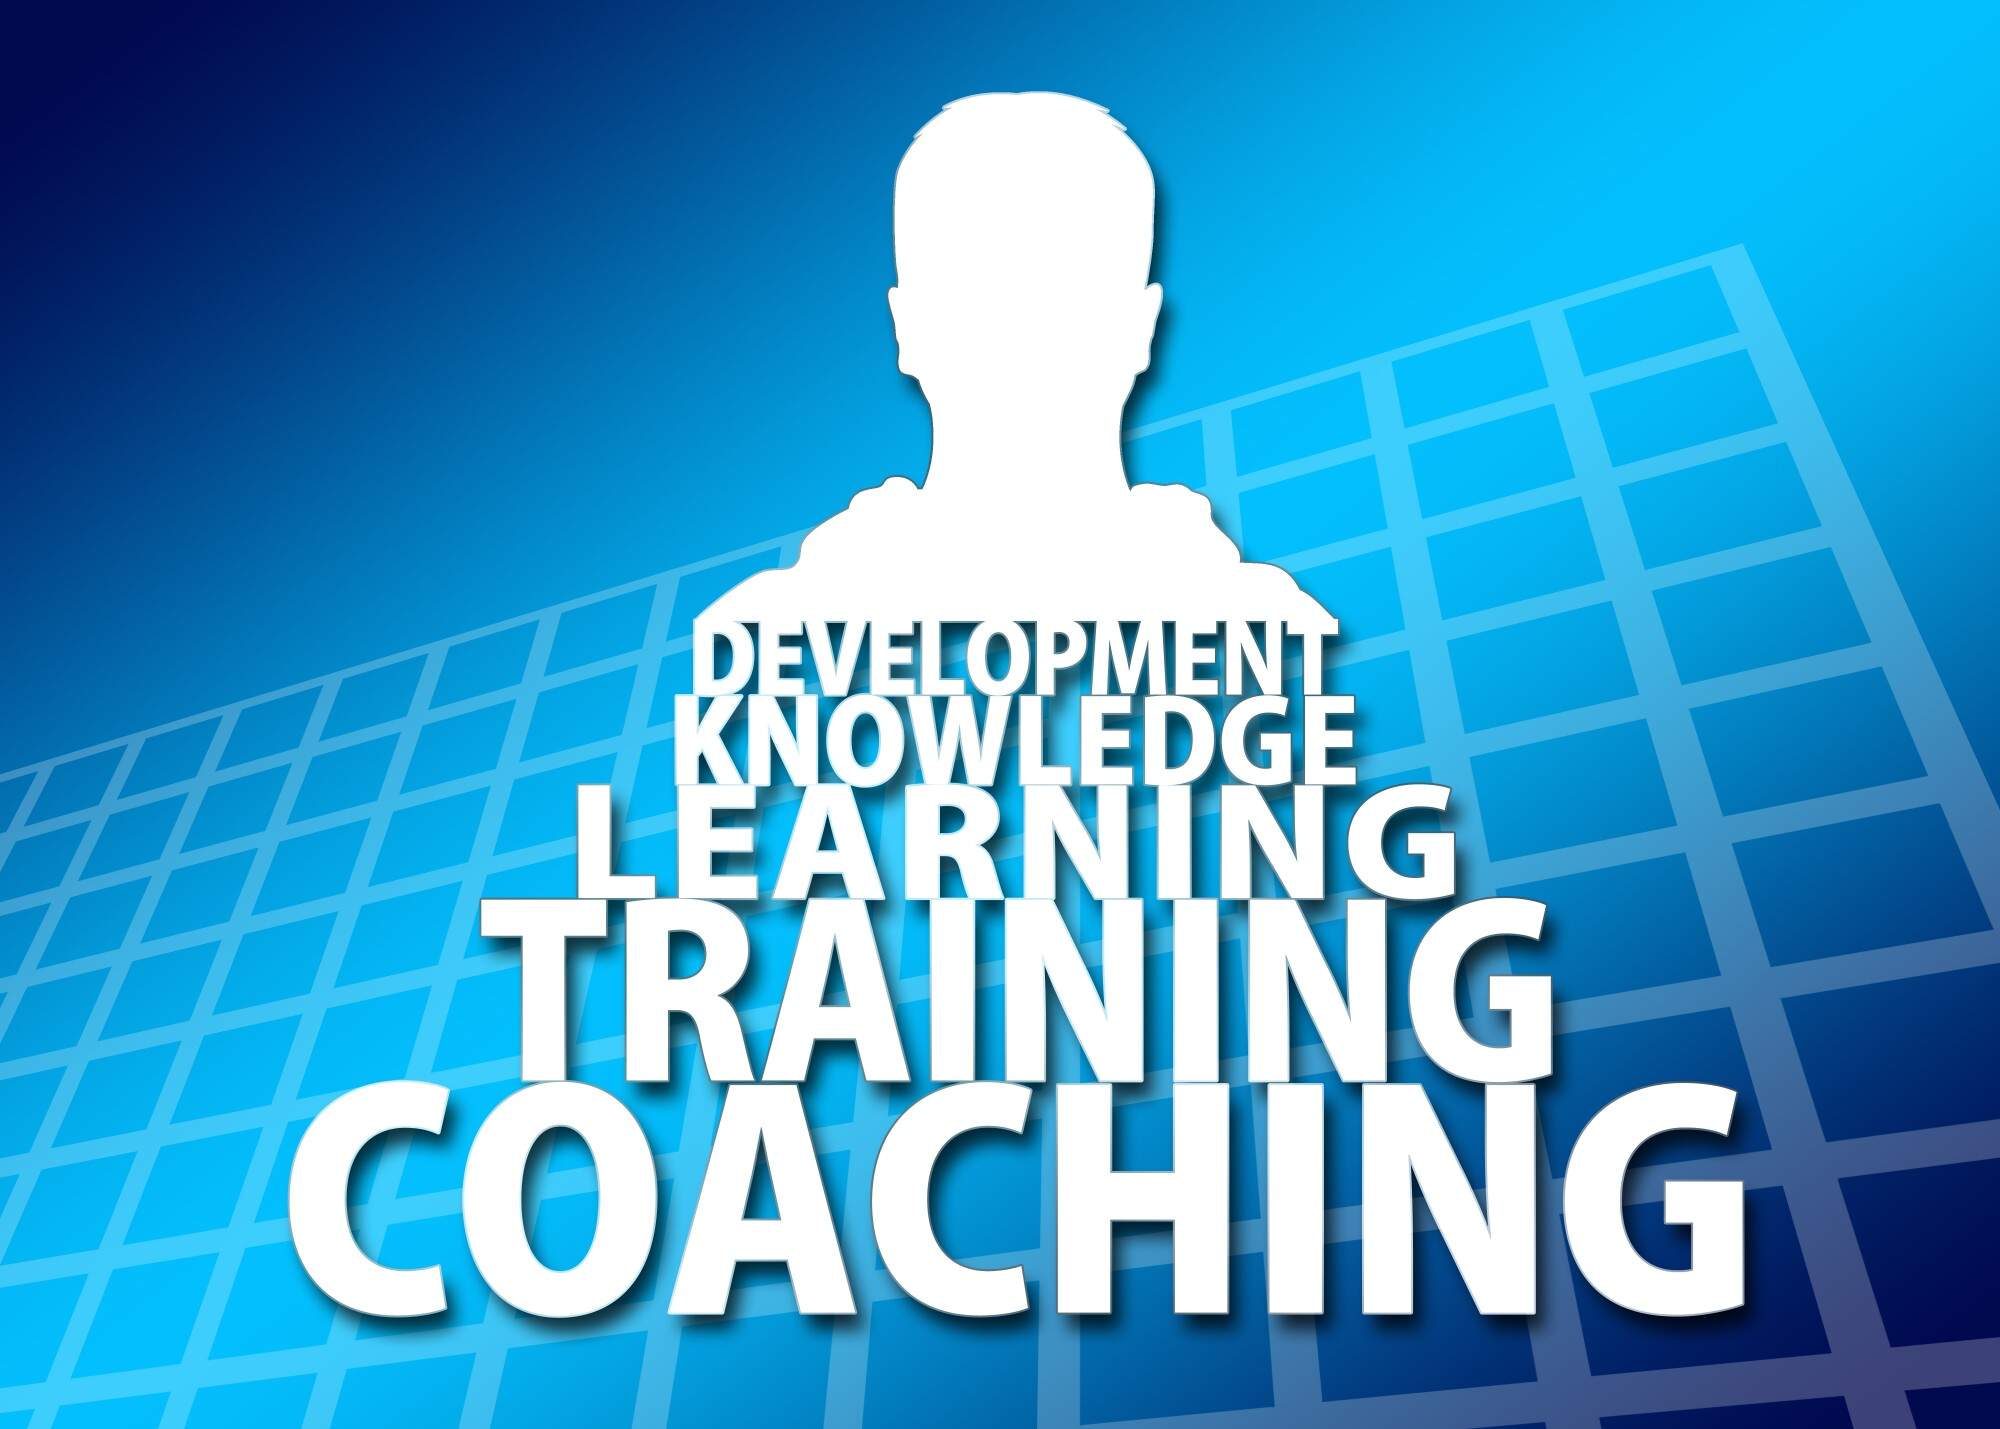 Consulting vs Coaching: What Are the Differences?